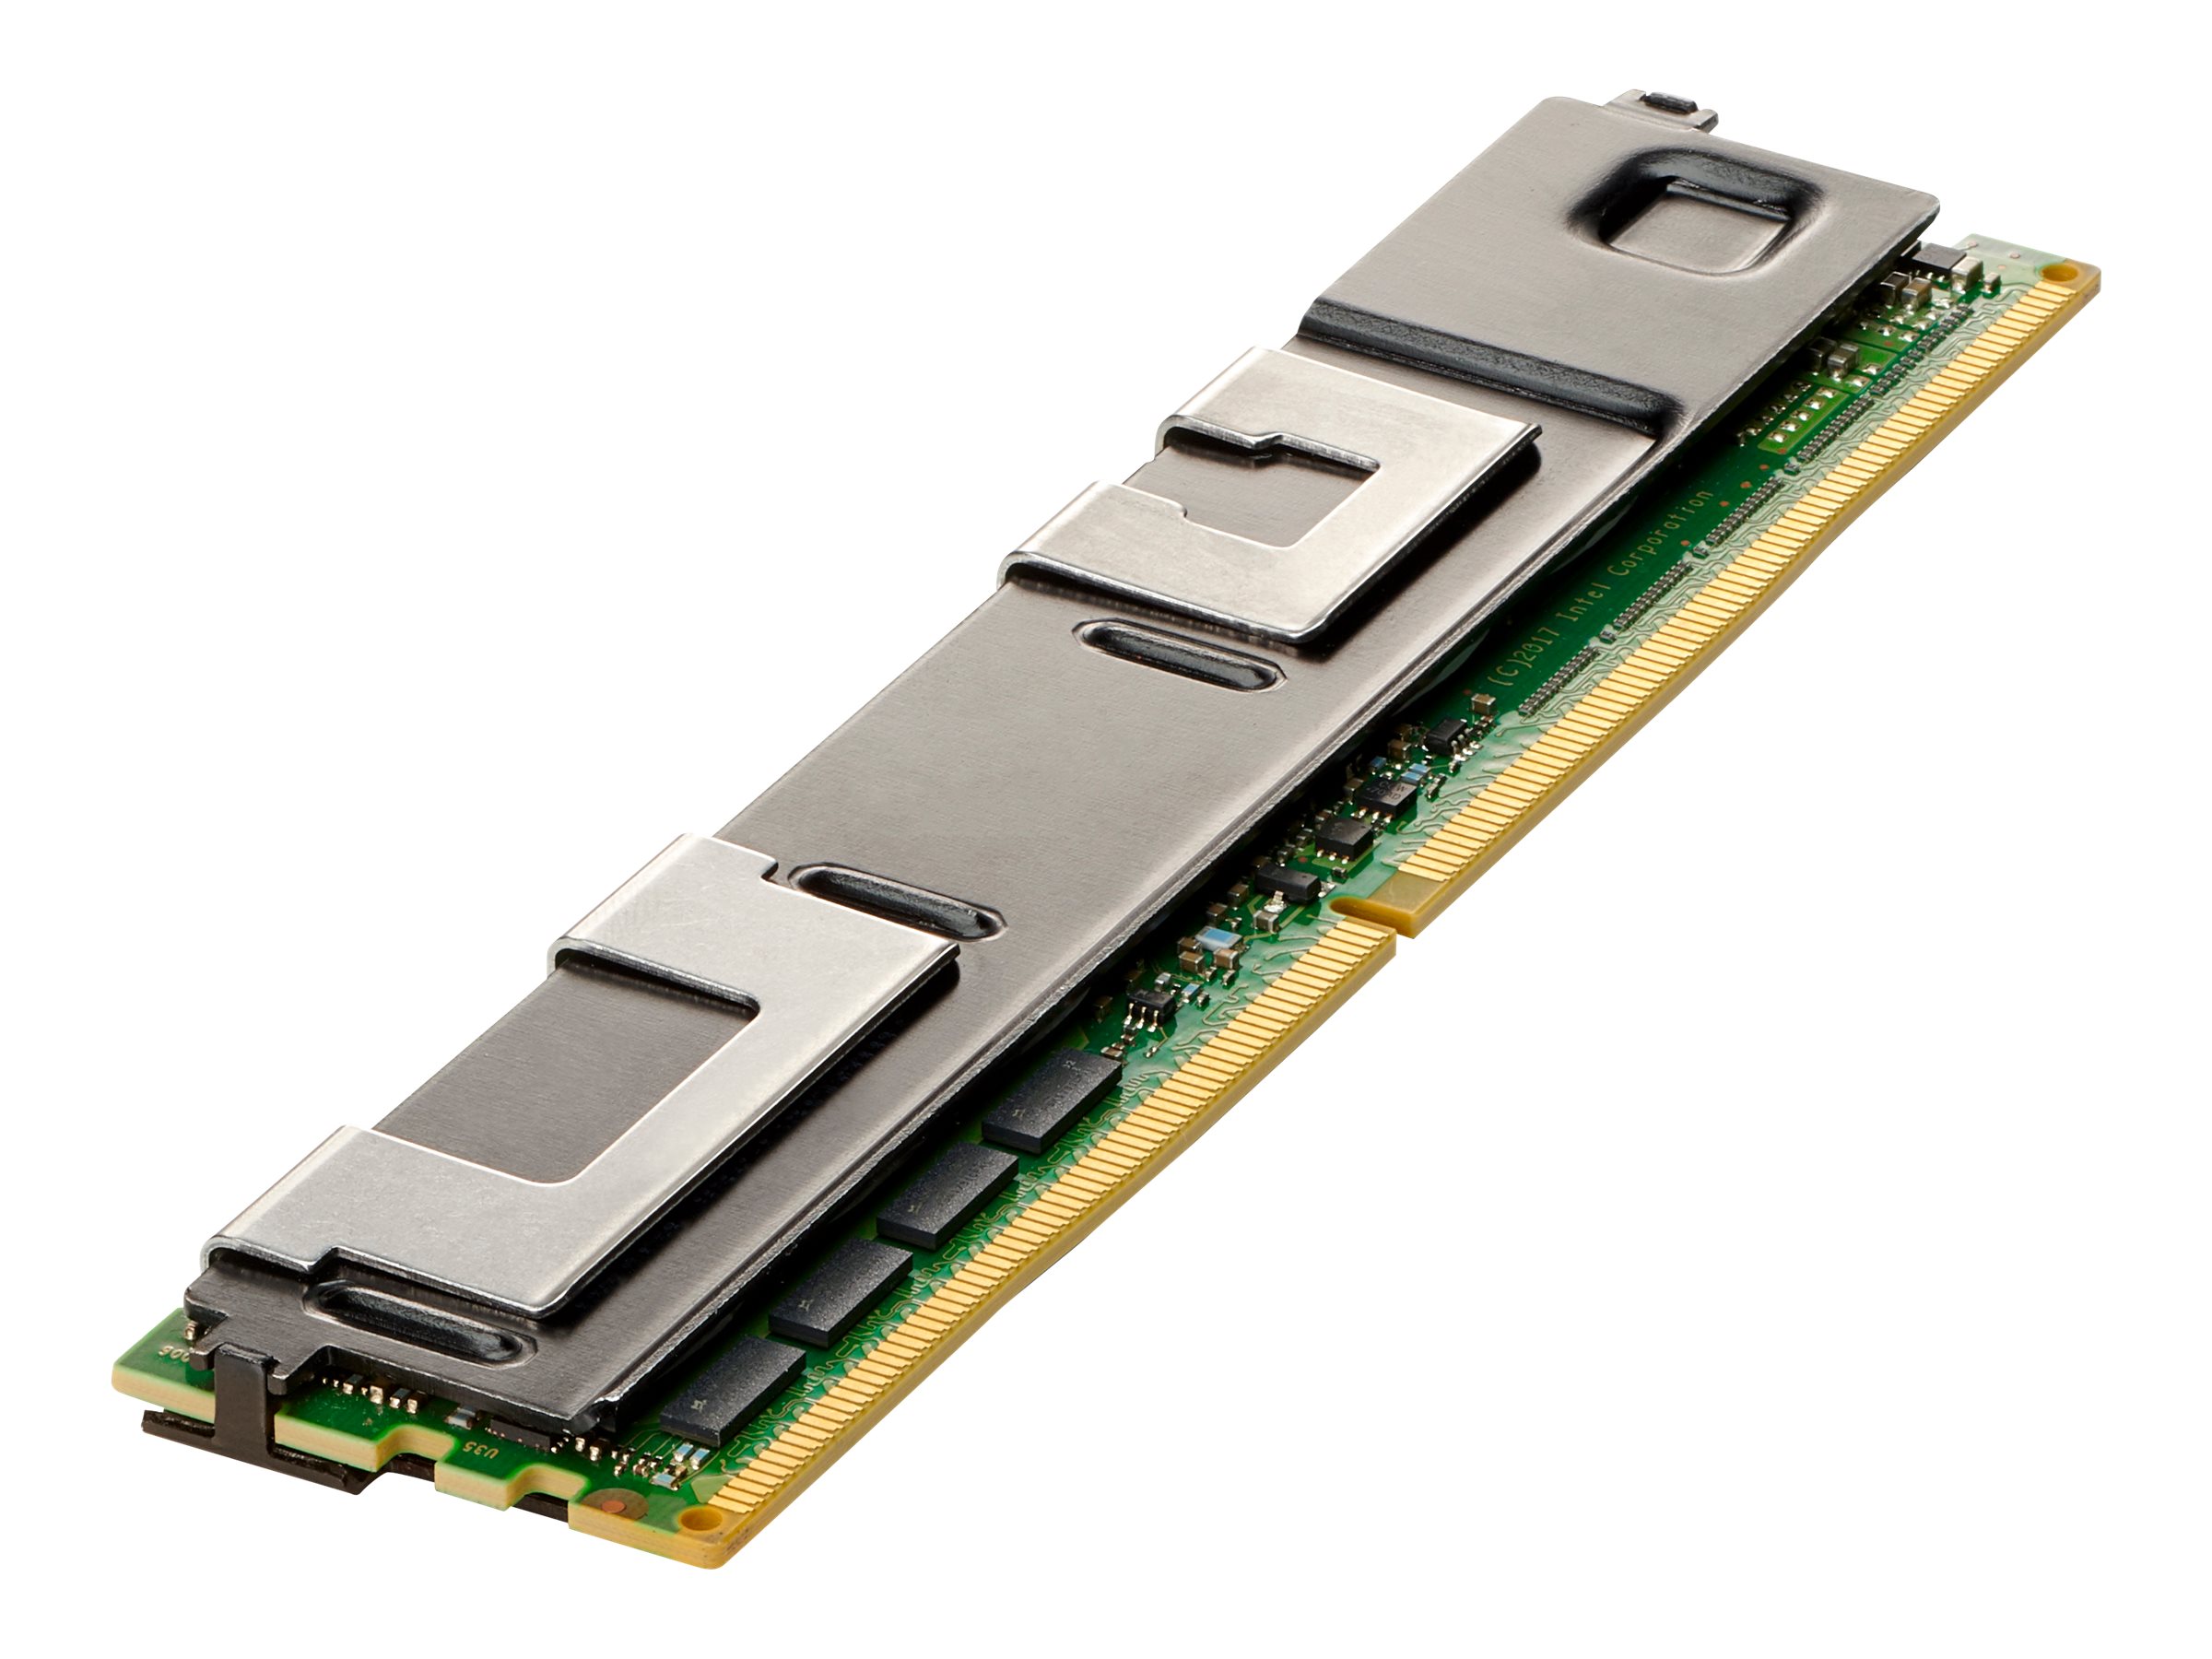 HPE 512GB 2666 Persistent Memory Kit (R0X04A)